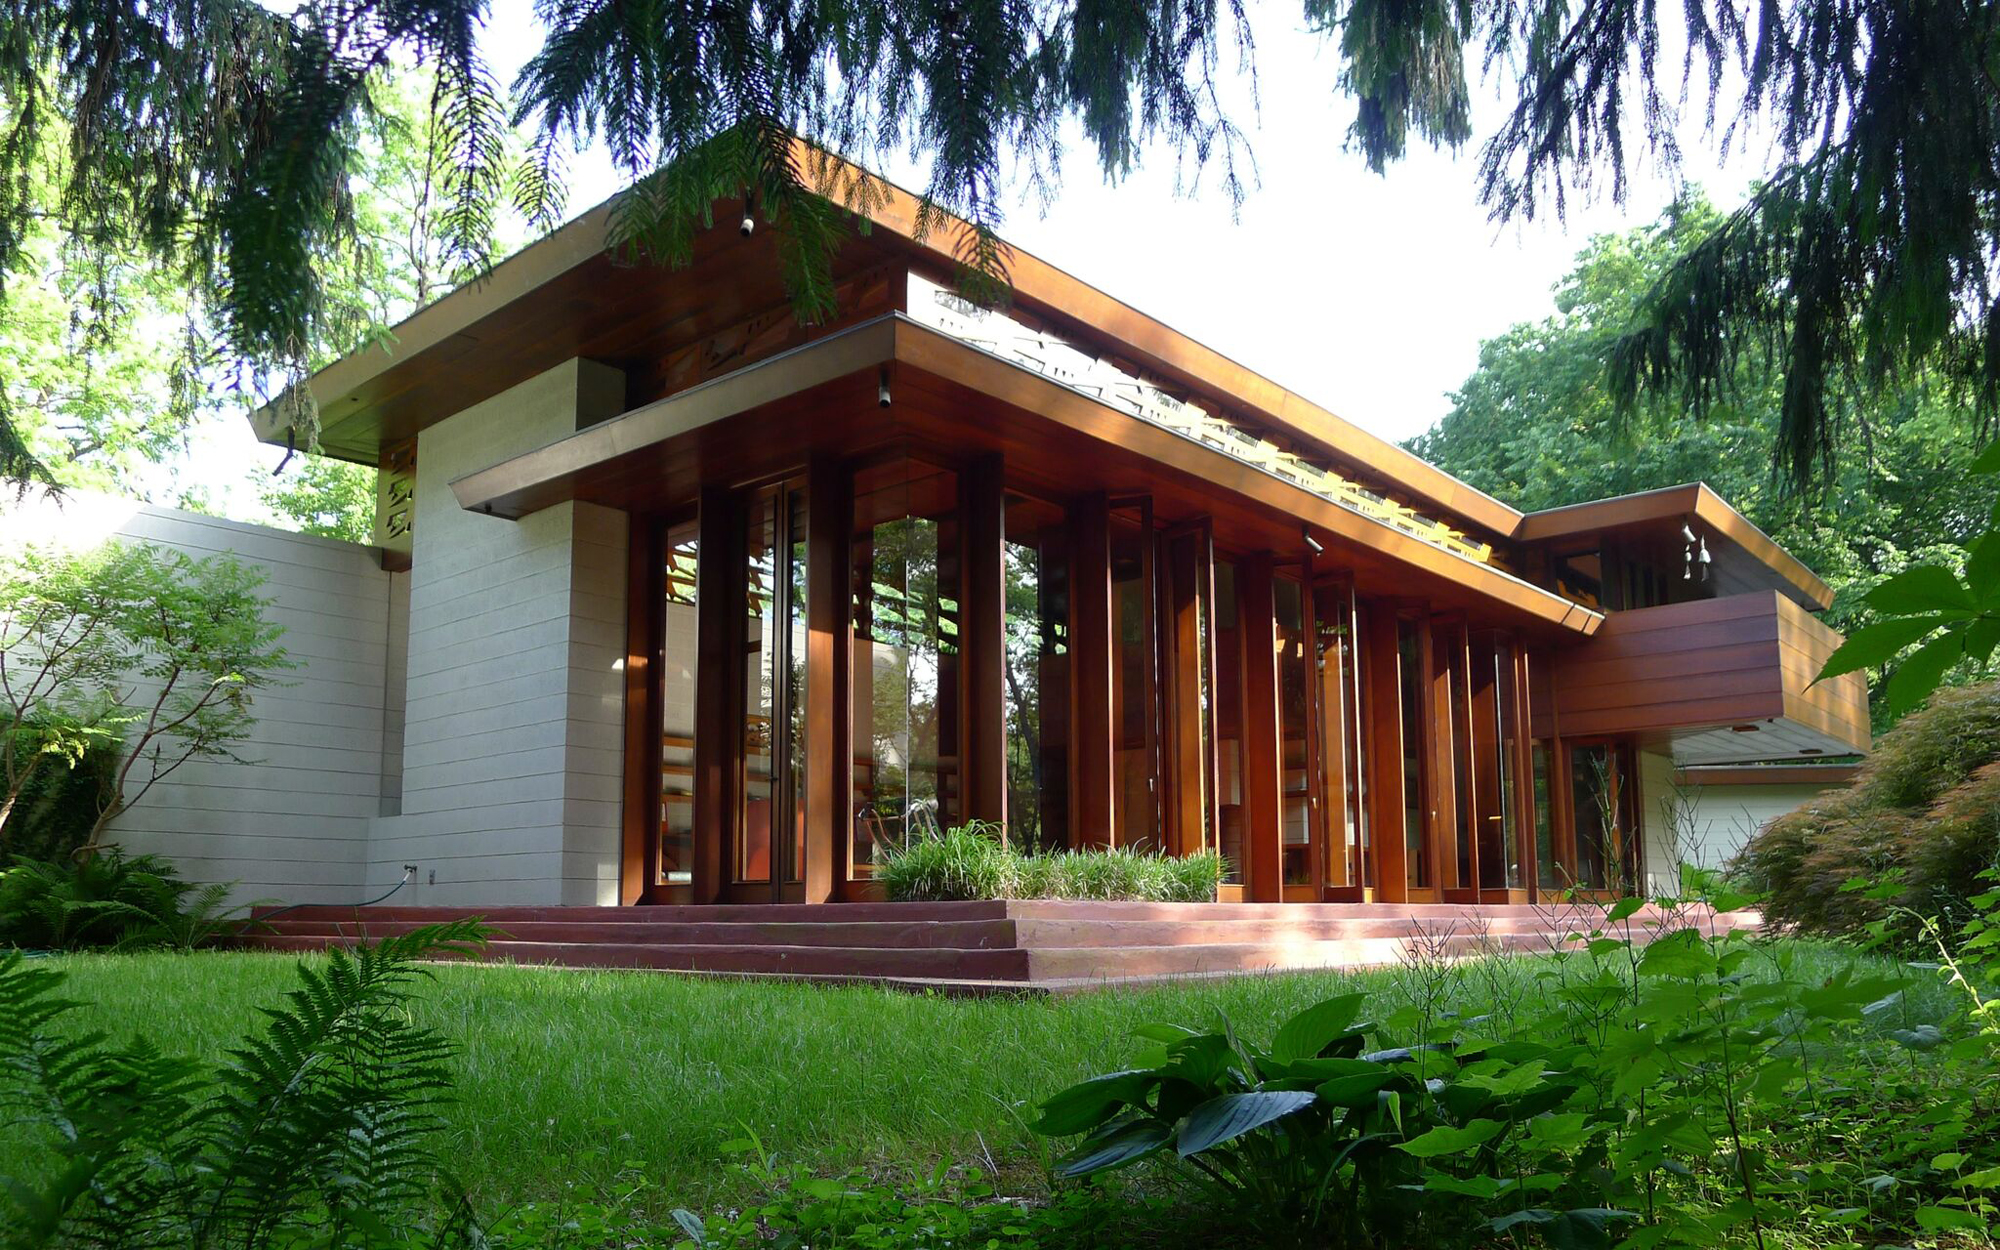 Frank Lloyd Wright's Bachman-Wilson House in New Jersey. Image courtesy of Crystal Bridges Museum of American Art